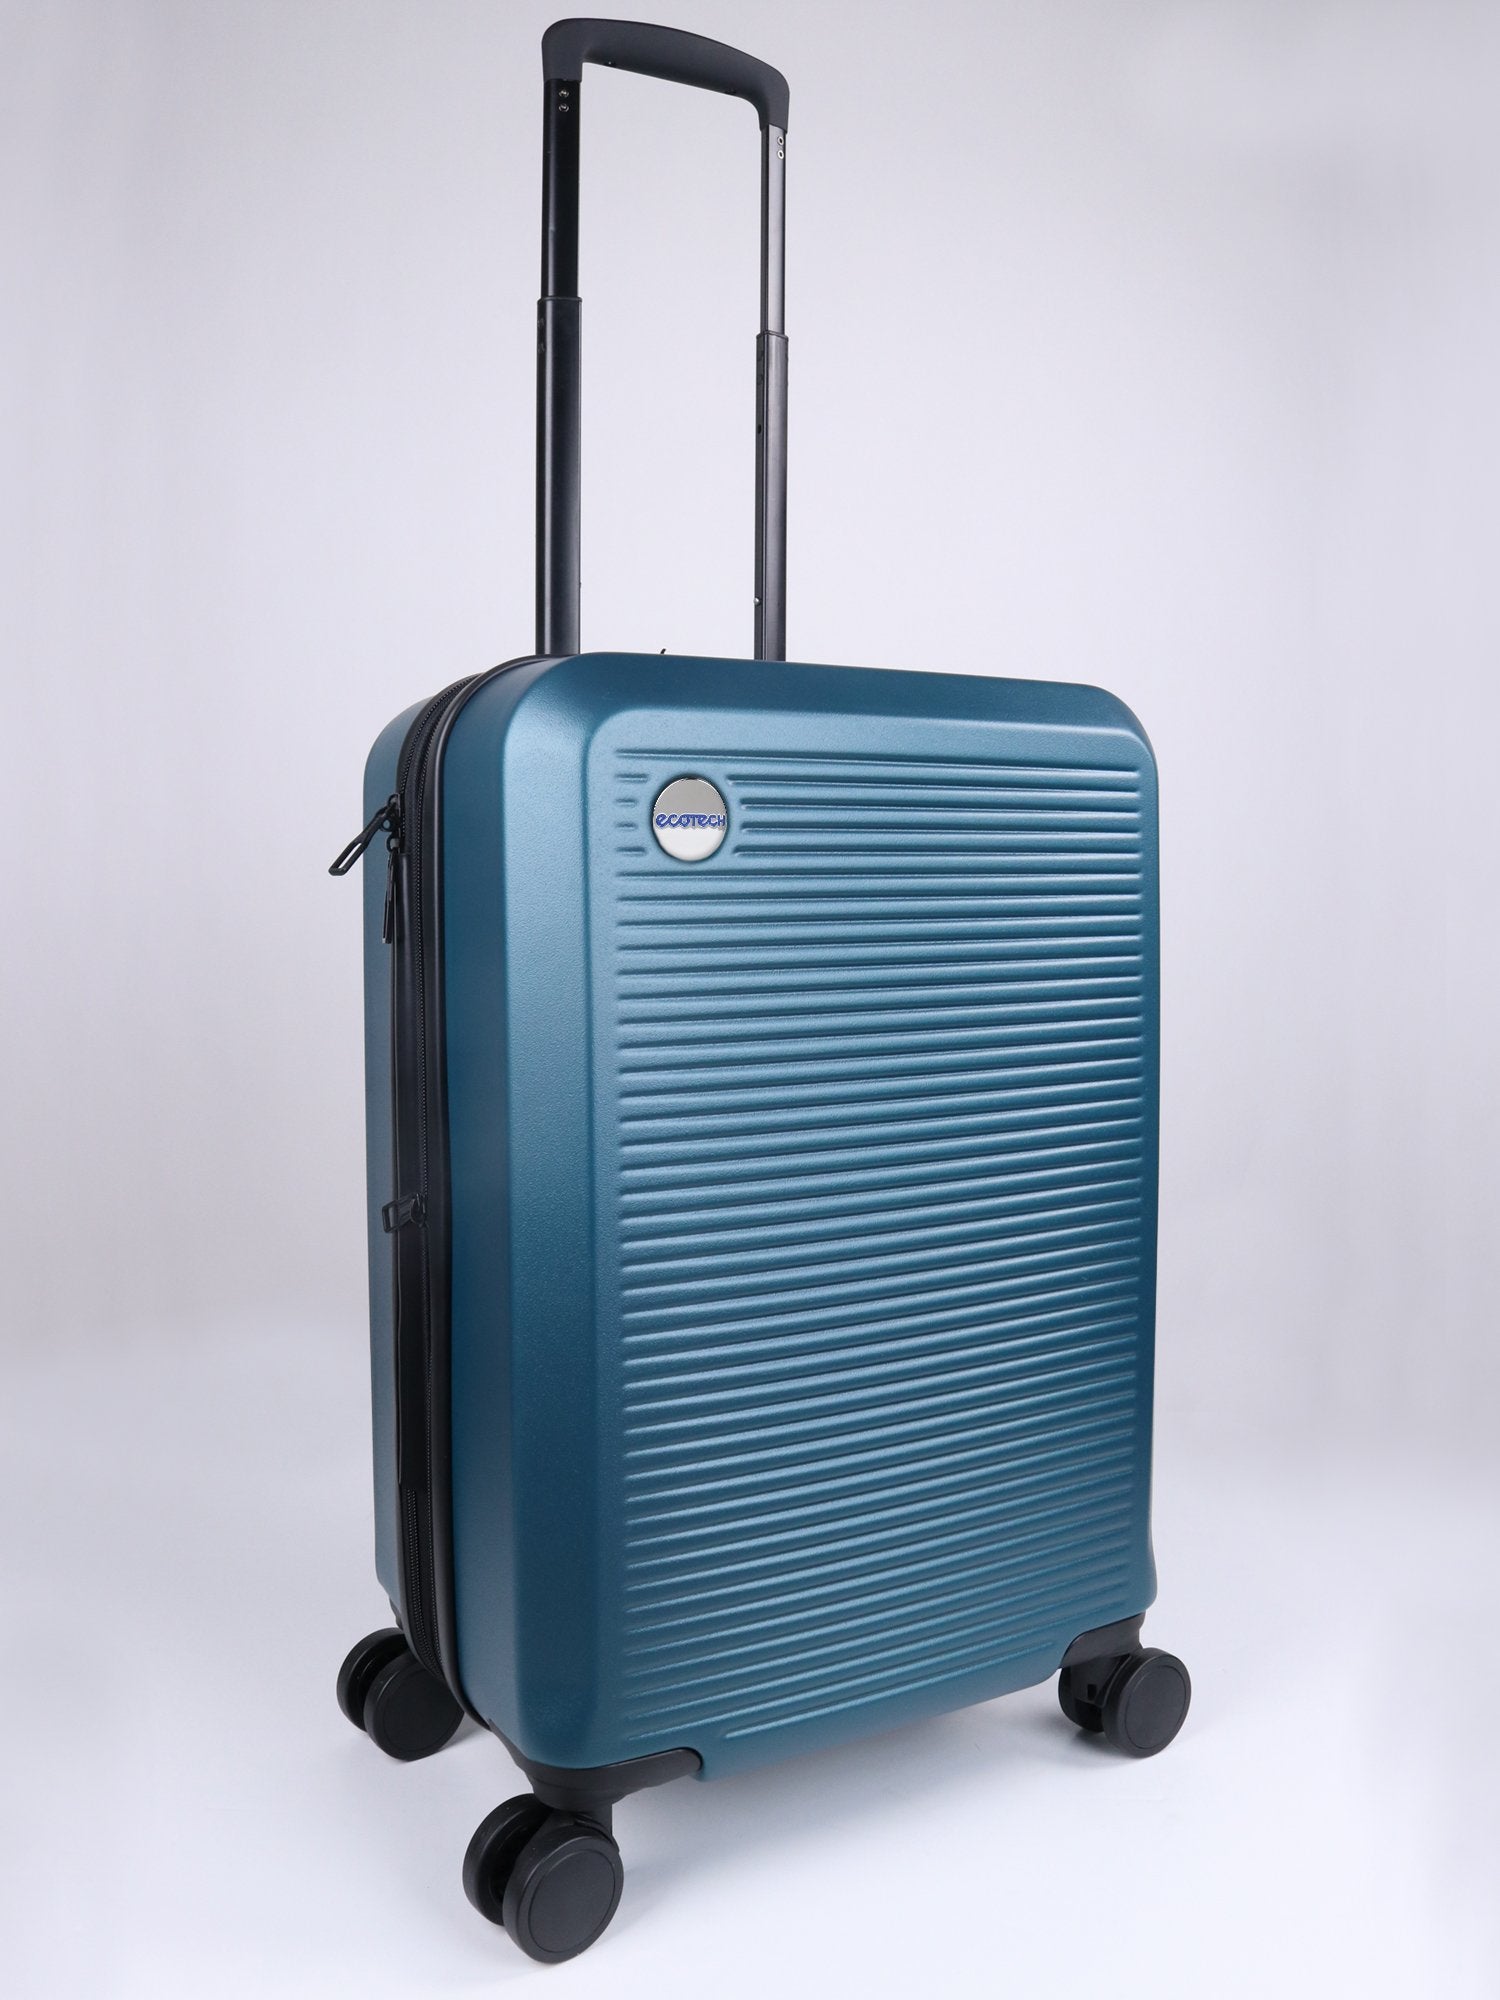 ECOTECH SPINNER CARRY ON LUGGAGE, TEAL